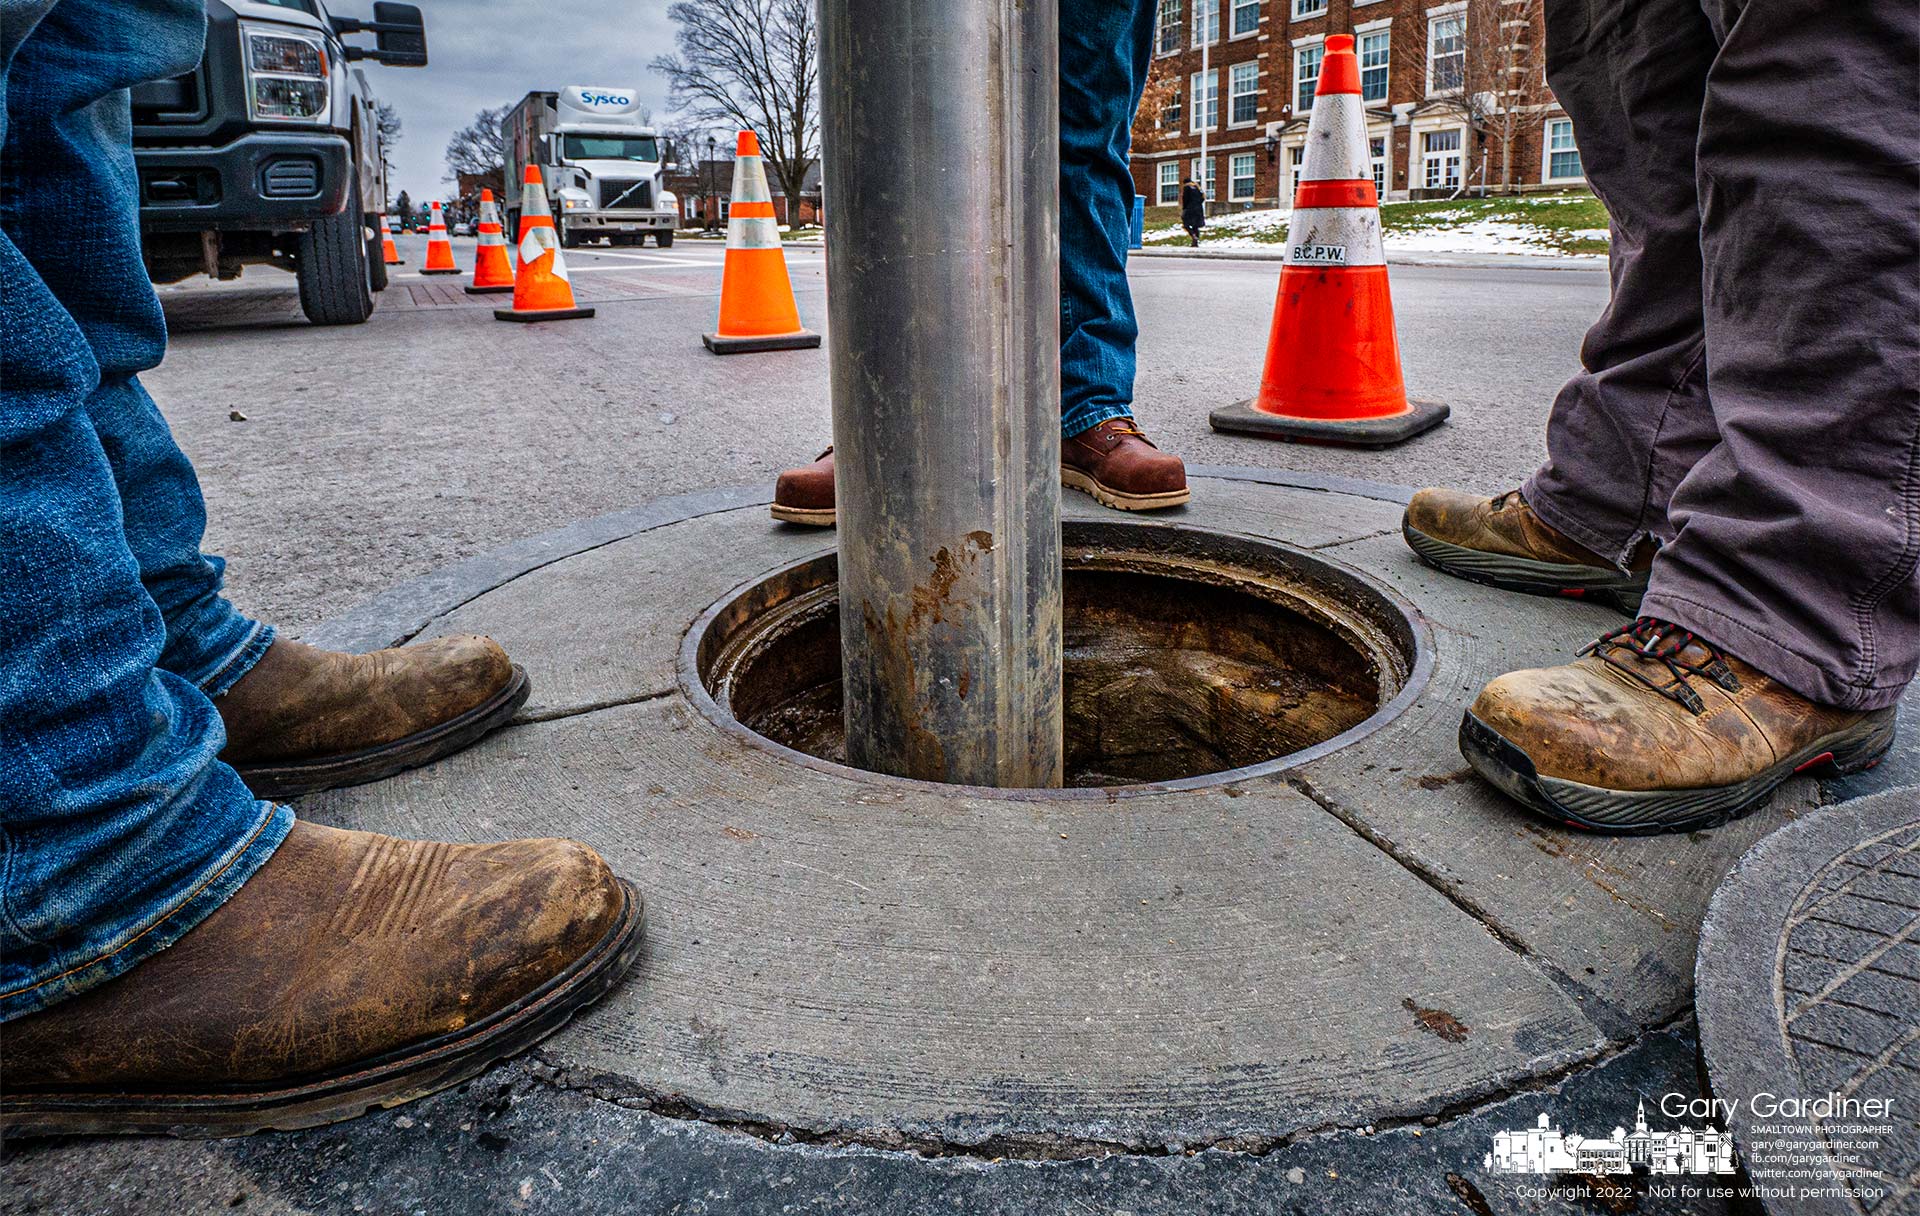 A city work crew vacuums debris and obstructions from beneath a storm sewer manhole cover at State and Park Streets. My Final Photo for Jan. 20, 2022.